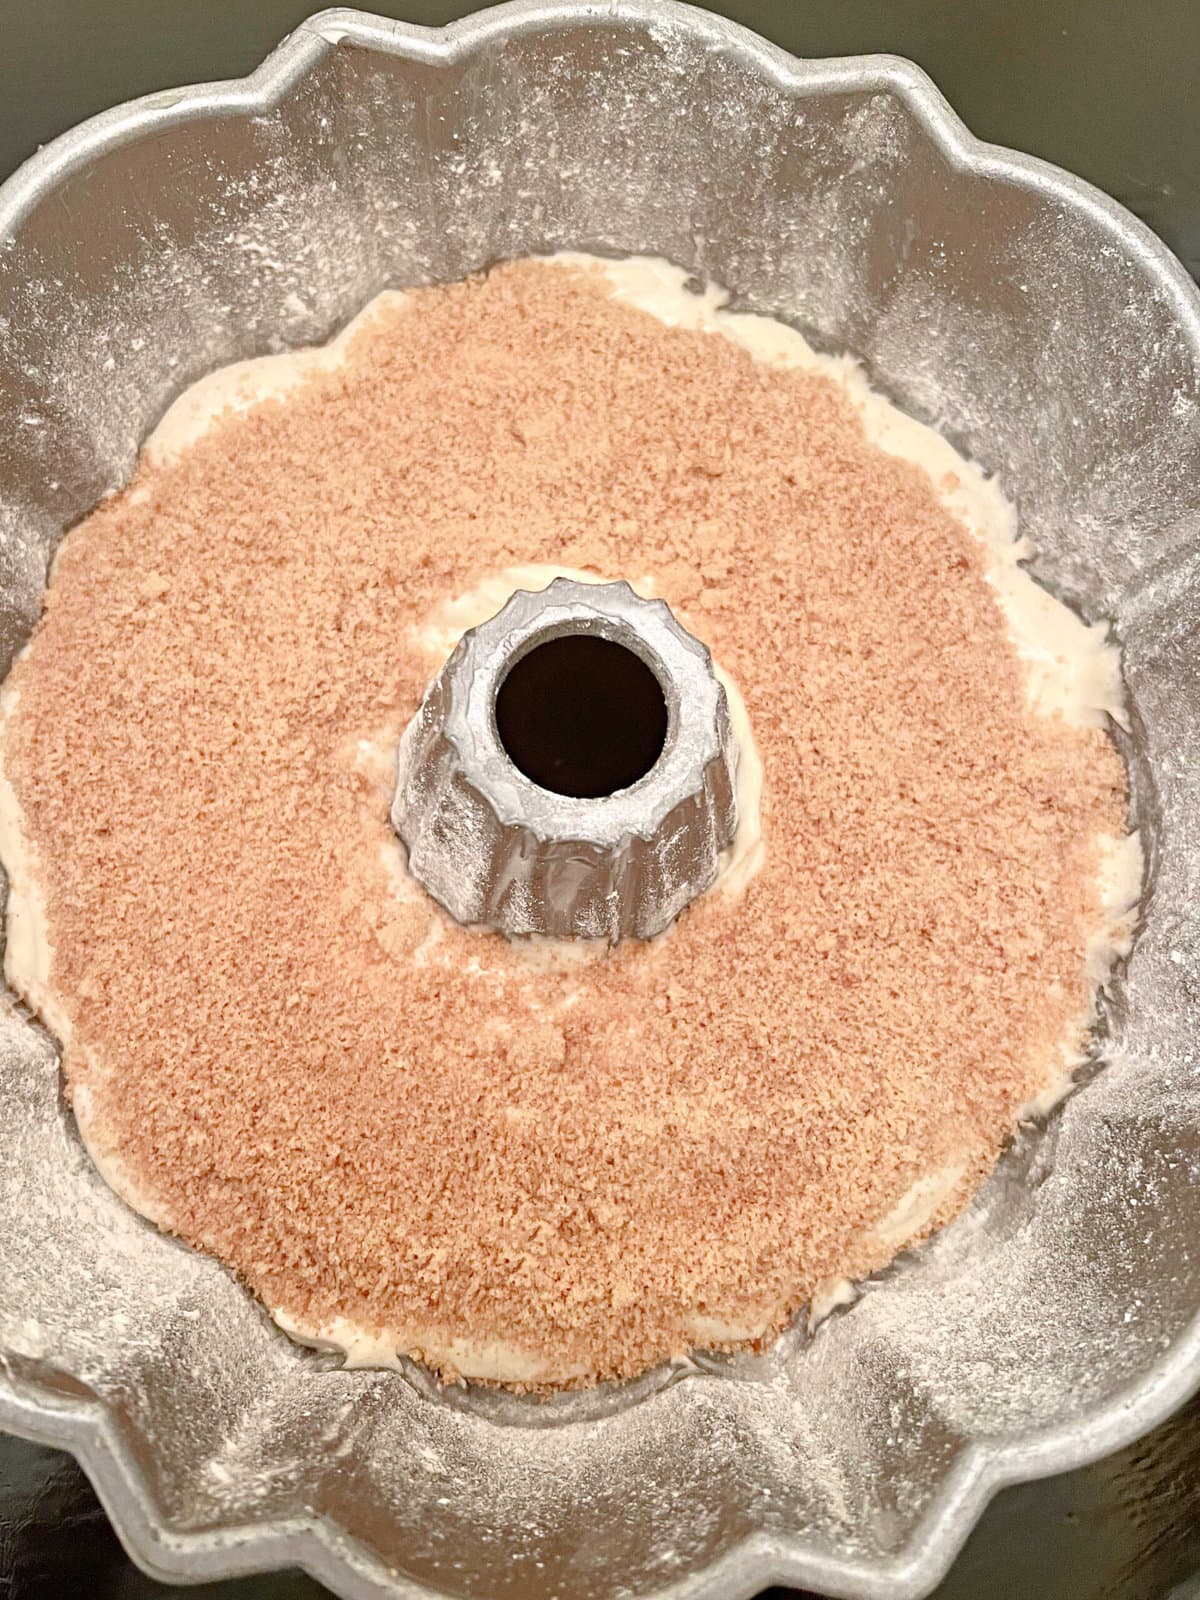 Half of cake batter in the bundt pan, sprinkled with the mixture of cinnamon and brown sugar.